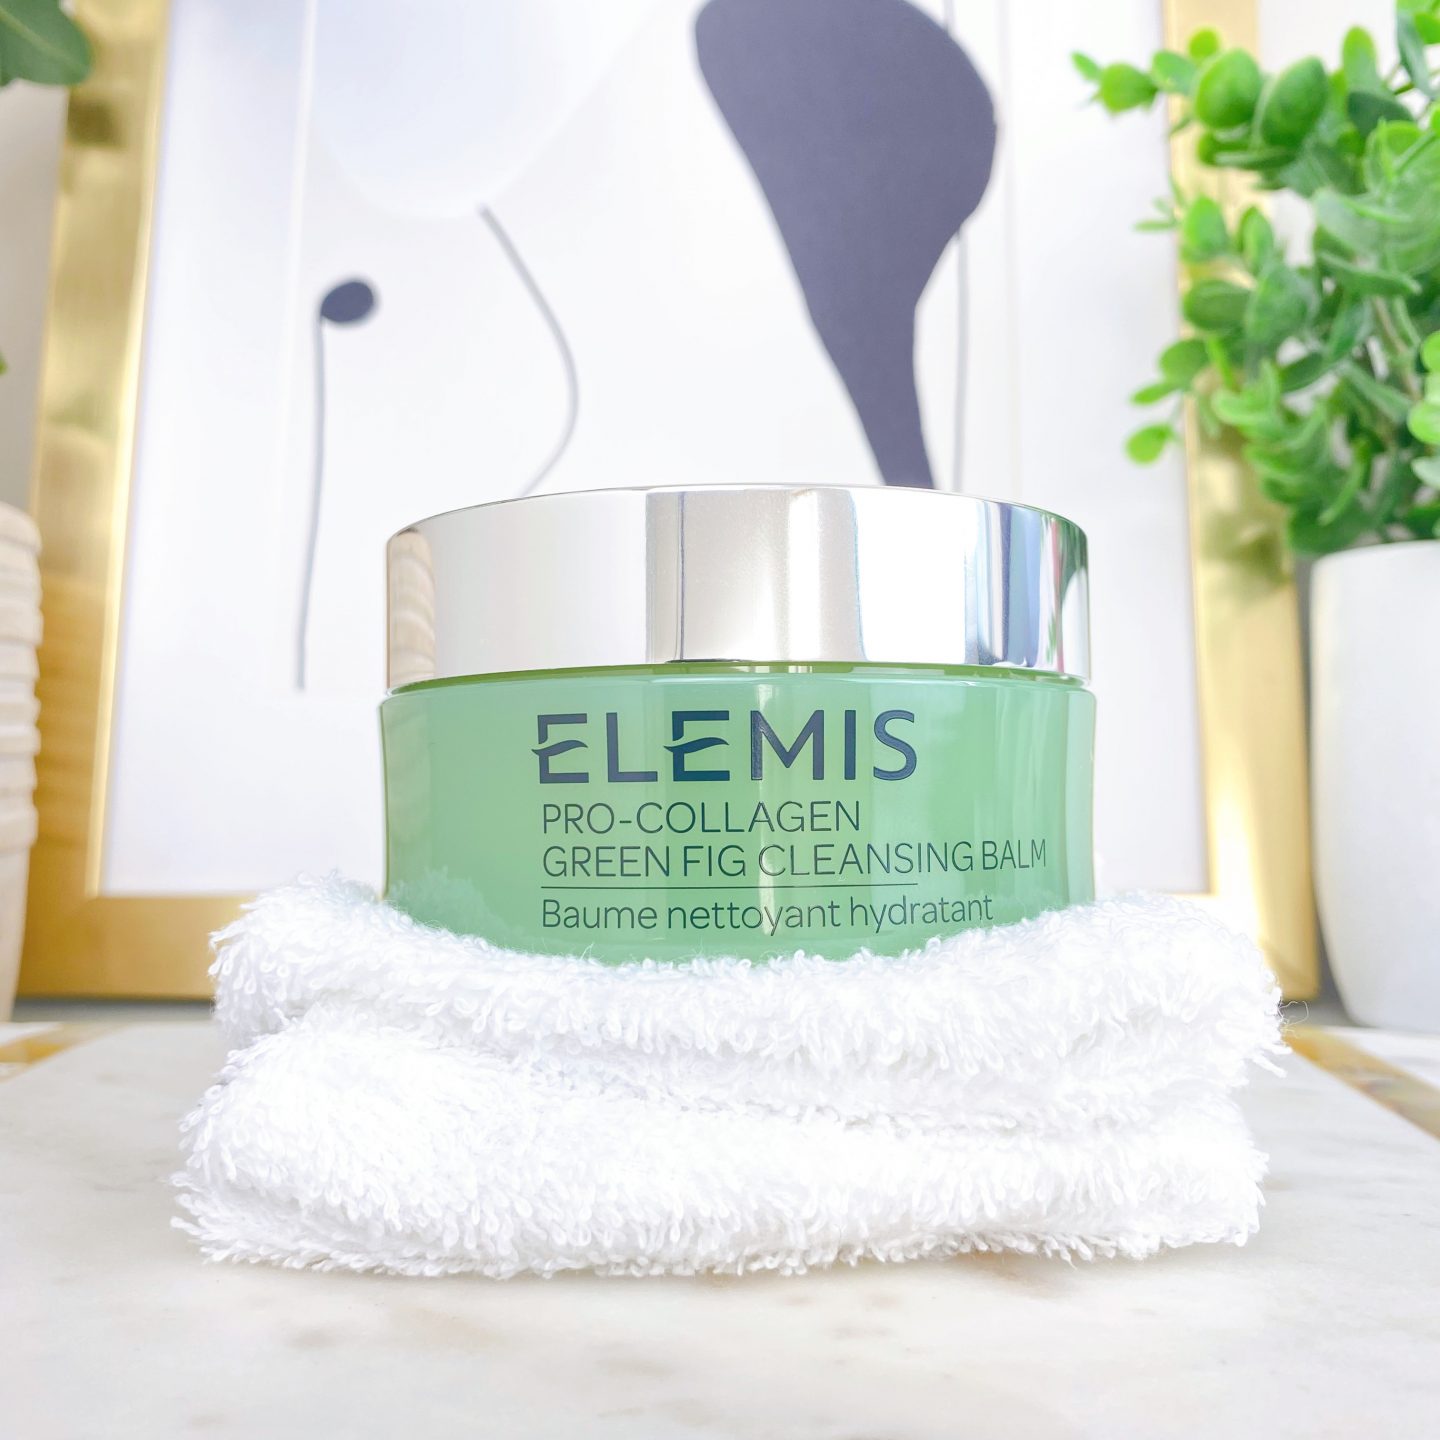 Elemis Pro-Collagen Green Fig Cleansing Balm Review